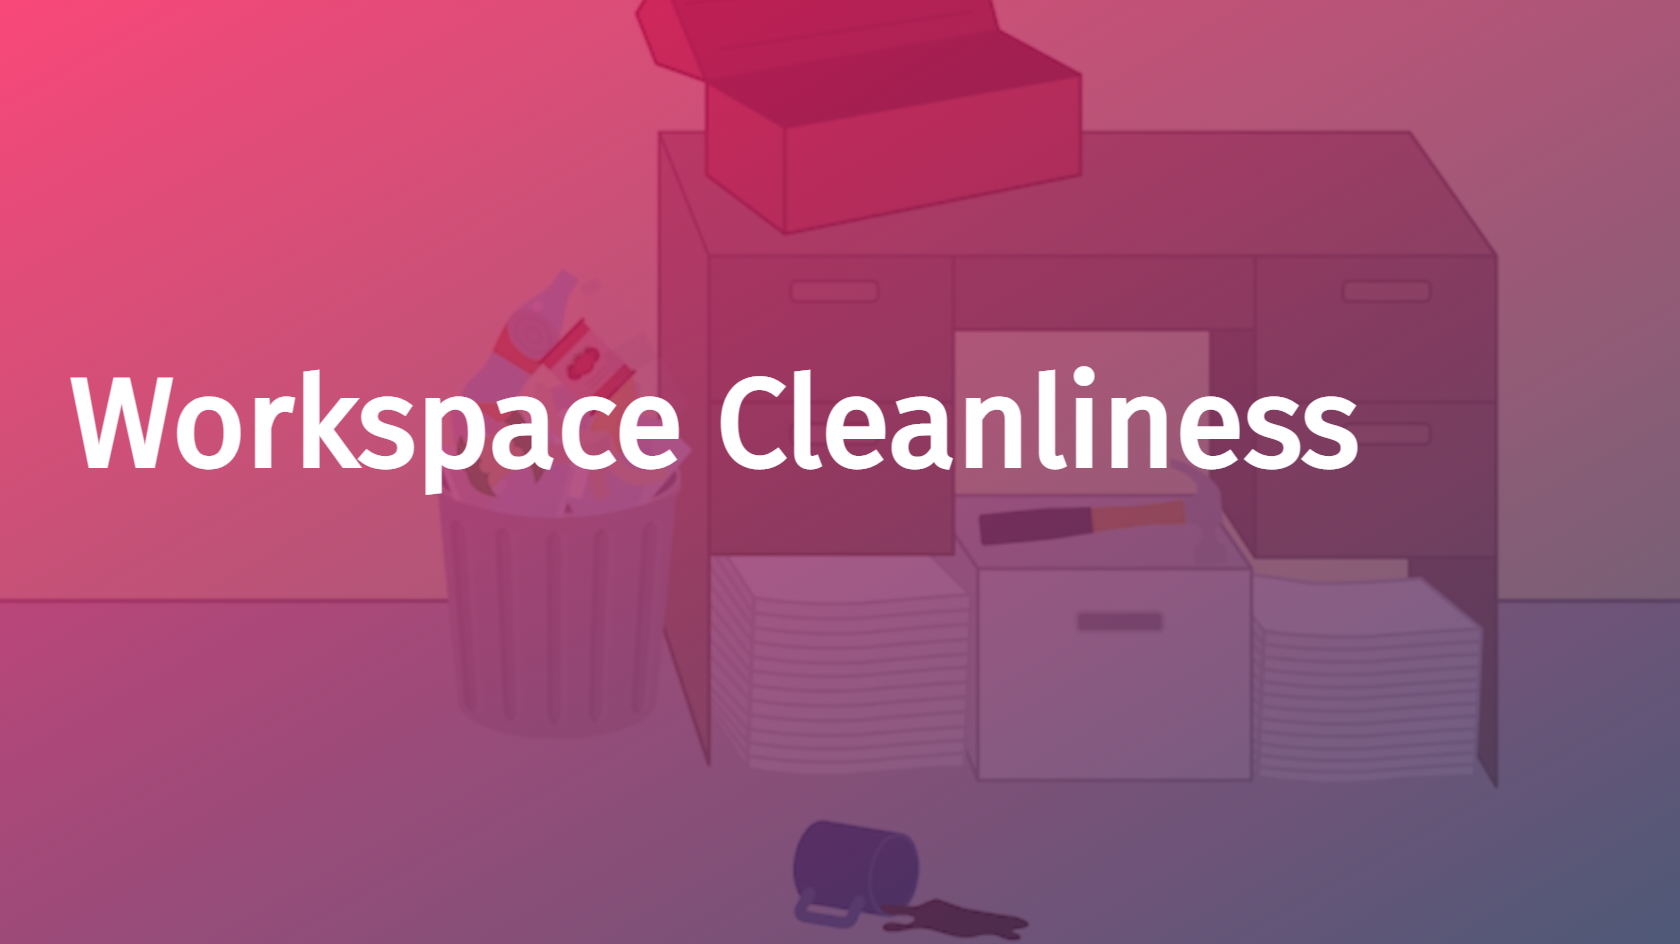 Spanish - Workspace Cleanliness